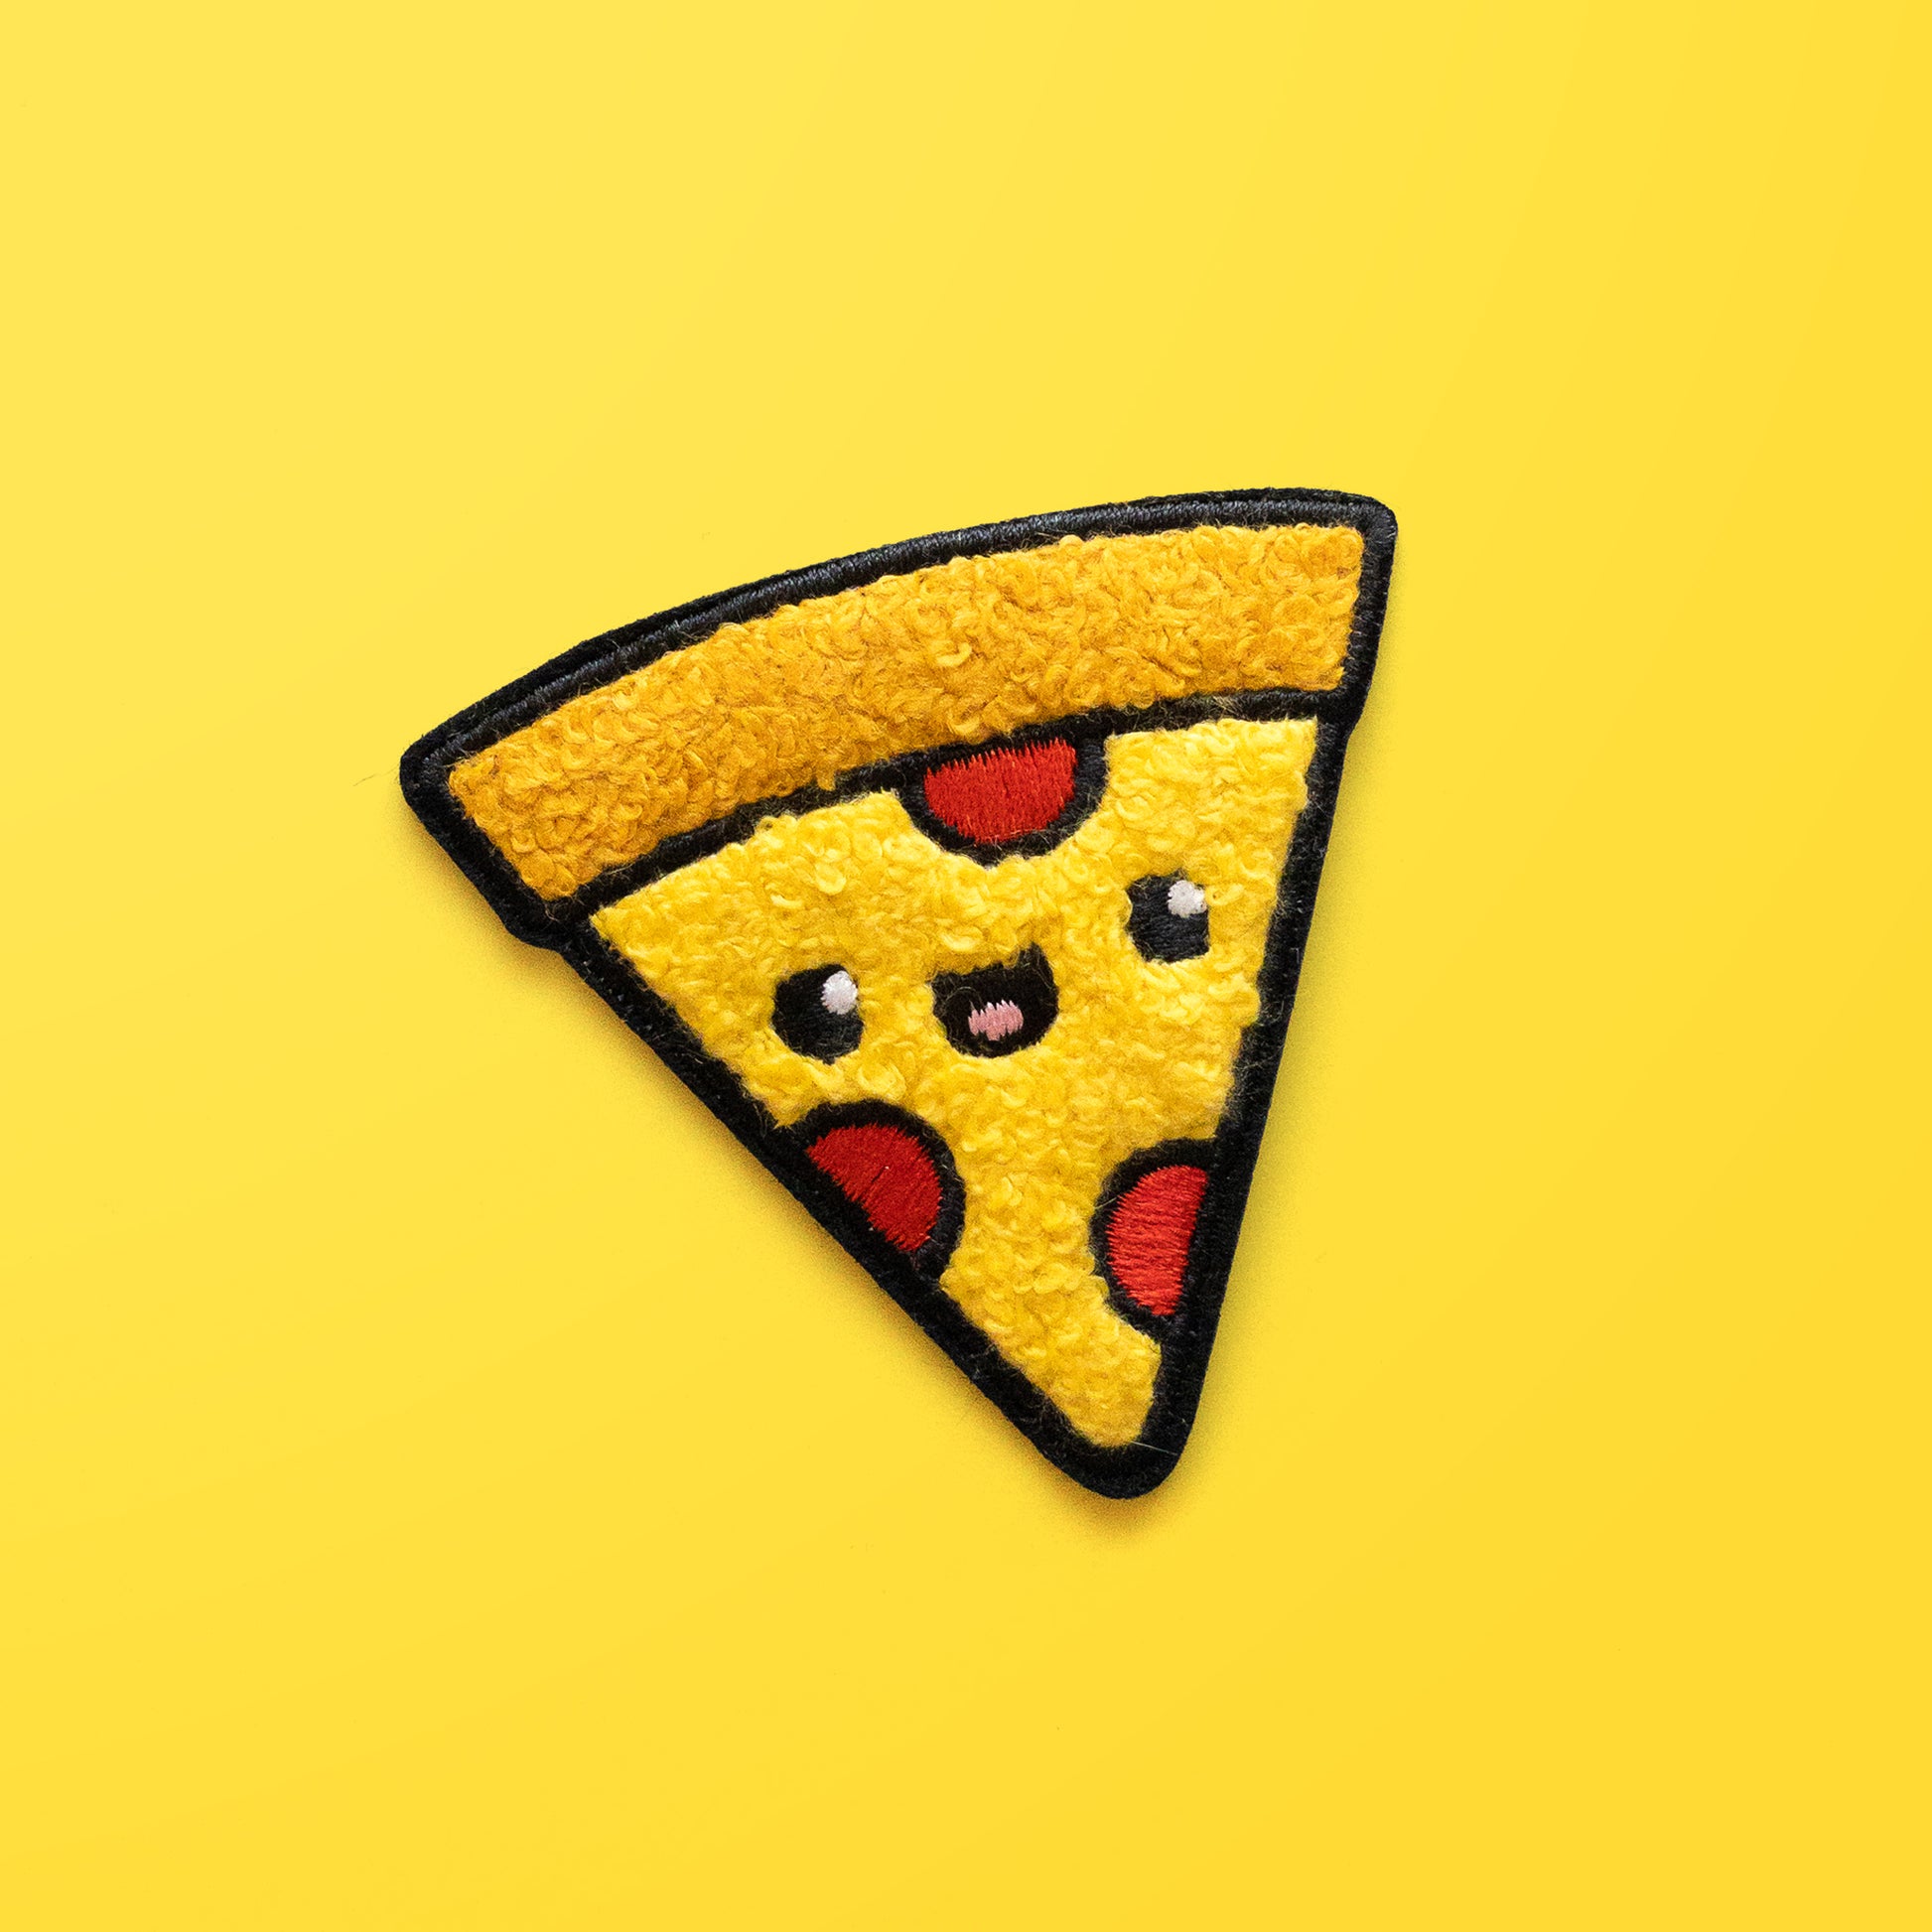 Pizza iron on chenille patch on yellow background